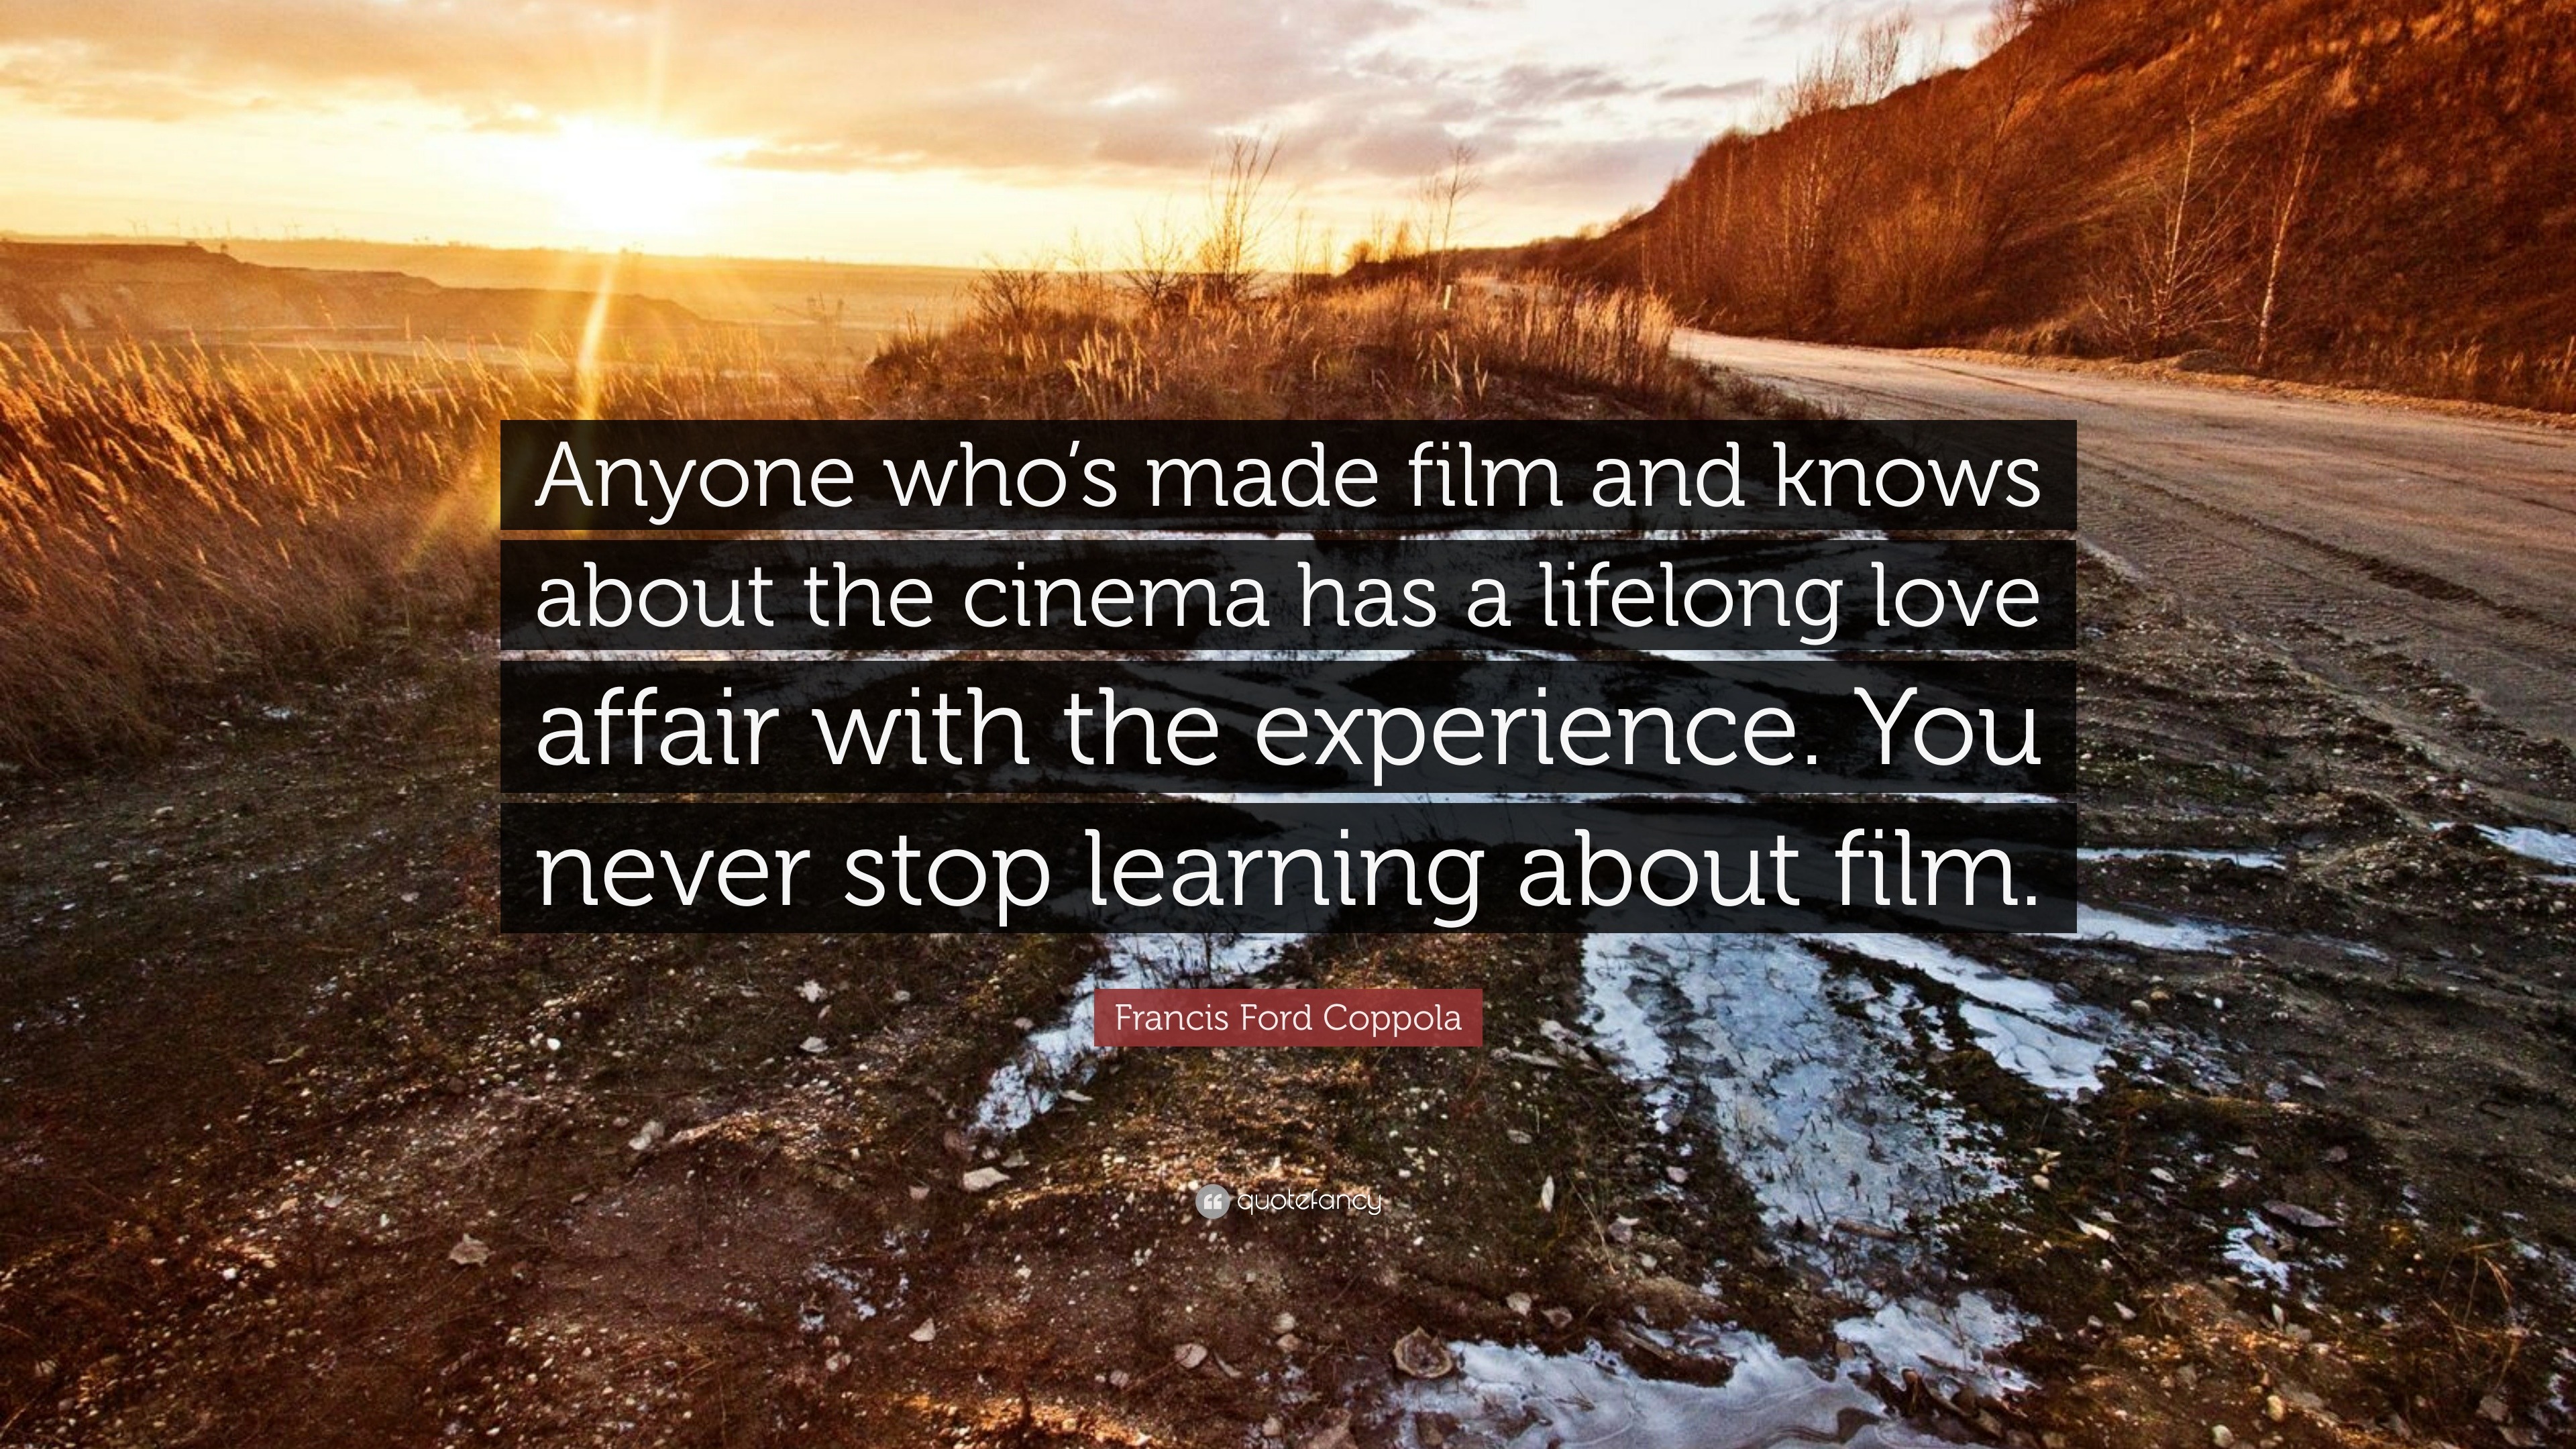 Francis Ford Coppola on doing what you love and taking pleasure in learning